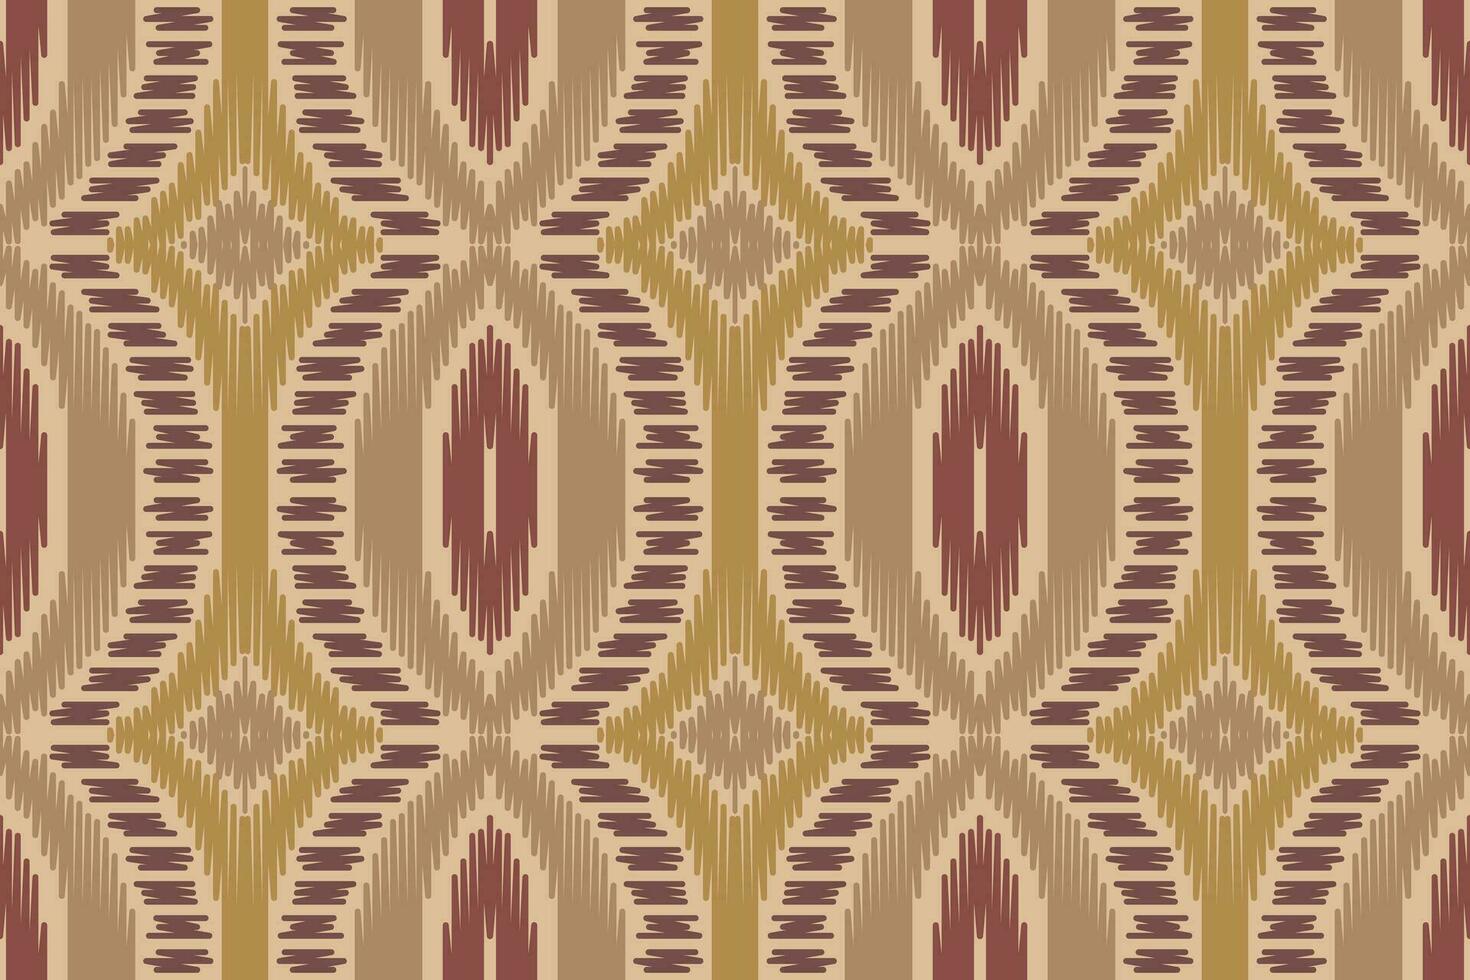 Ikat Seamless Pattern Embroidery Background. Ikat Texture Geometric Ethnic Oriental Pattern Traditional. Ikat Aztec Style Abstract Design for Print Texture,fabric,saree,sari,carpet. vector